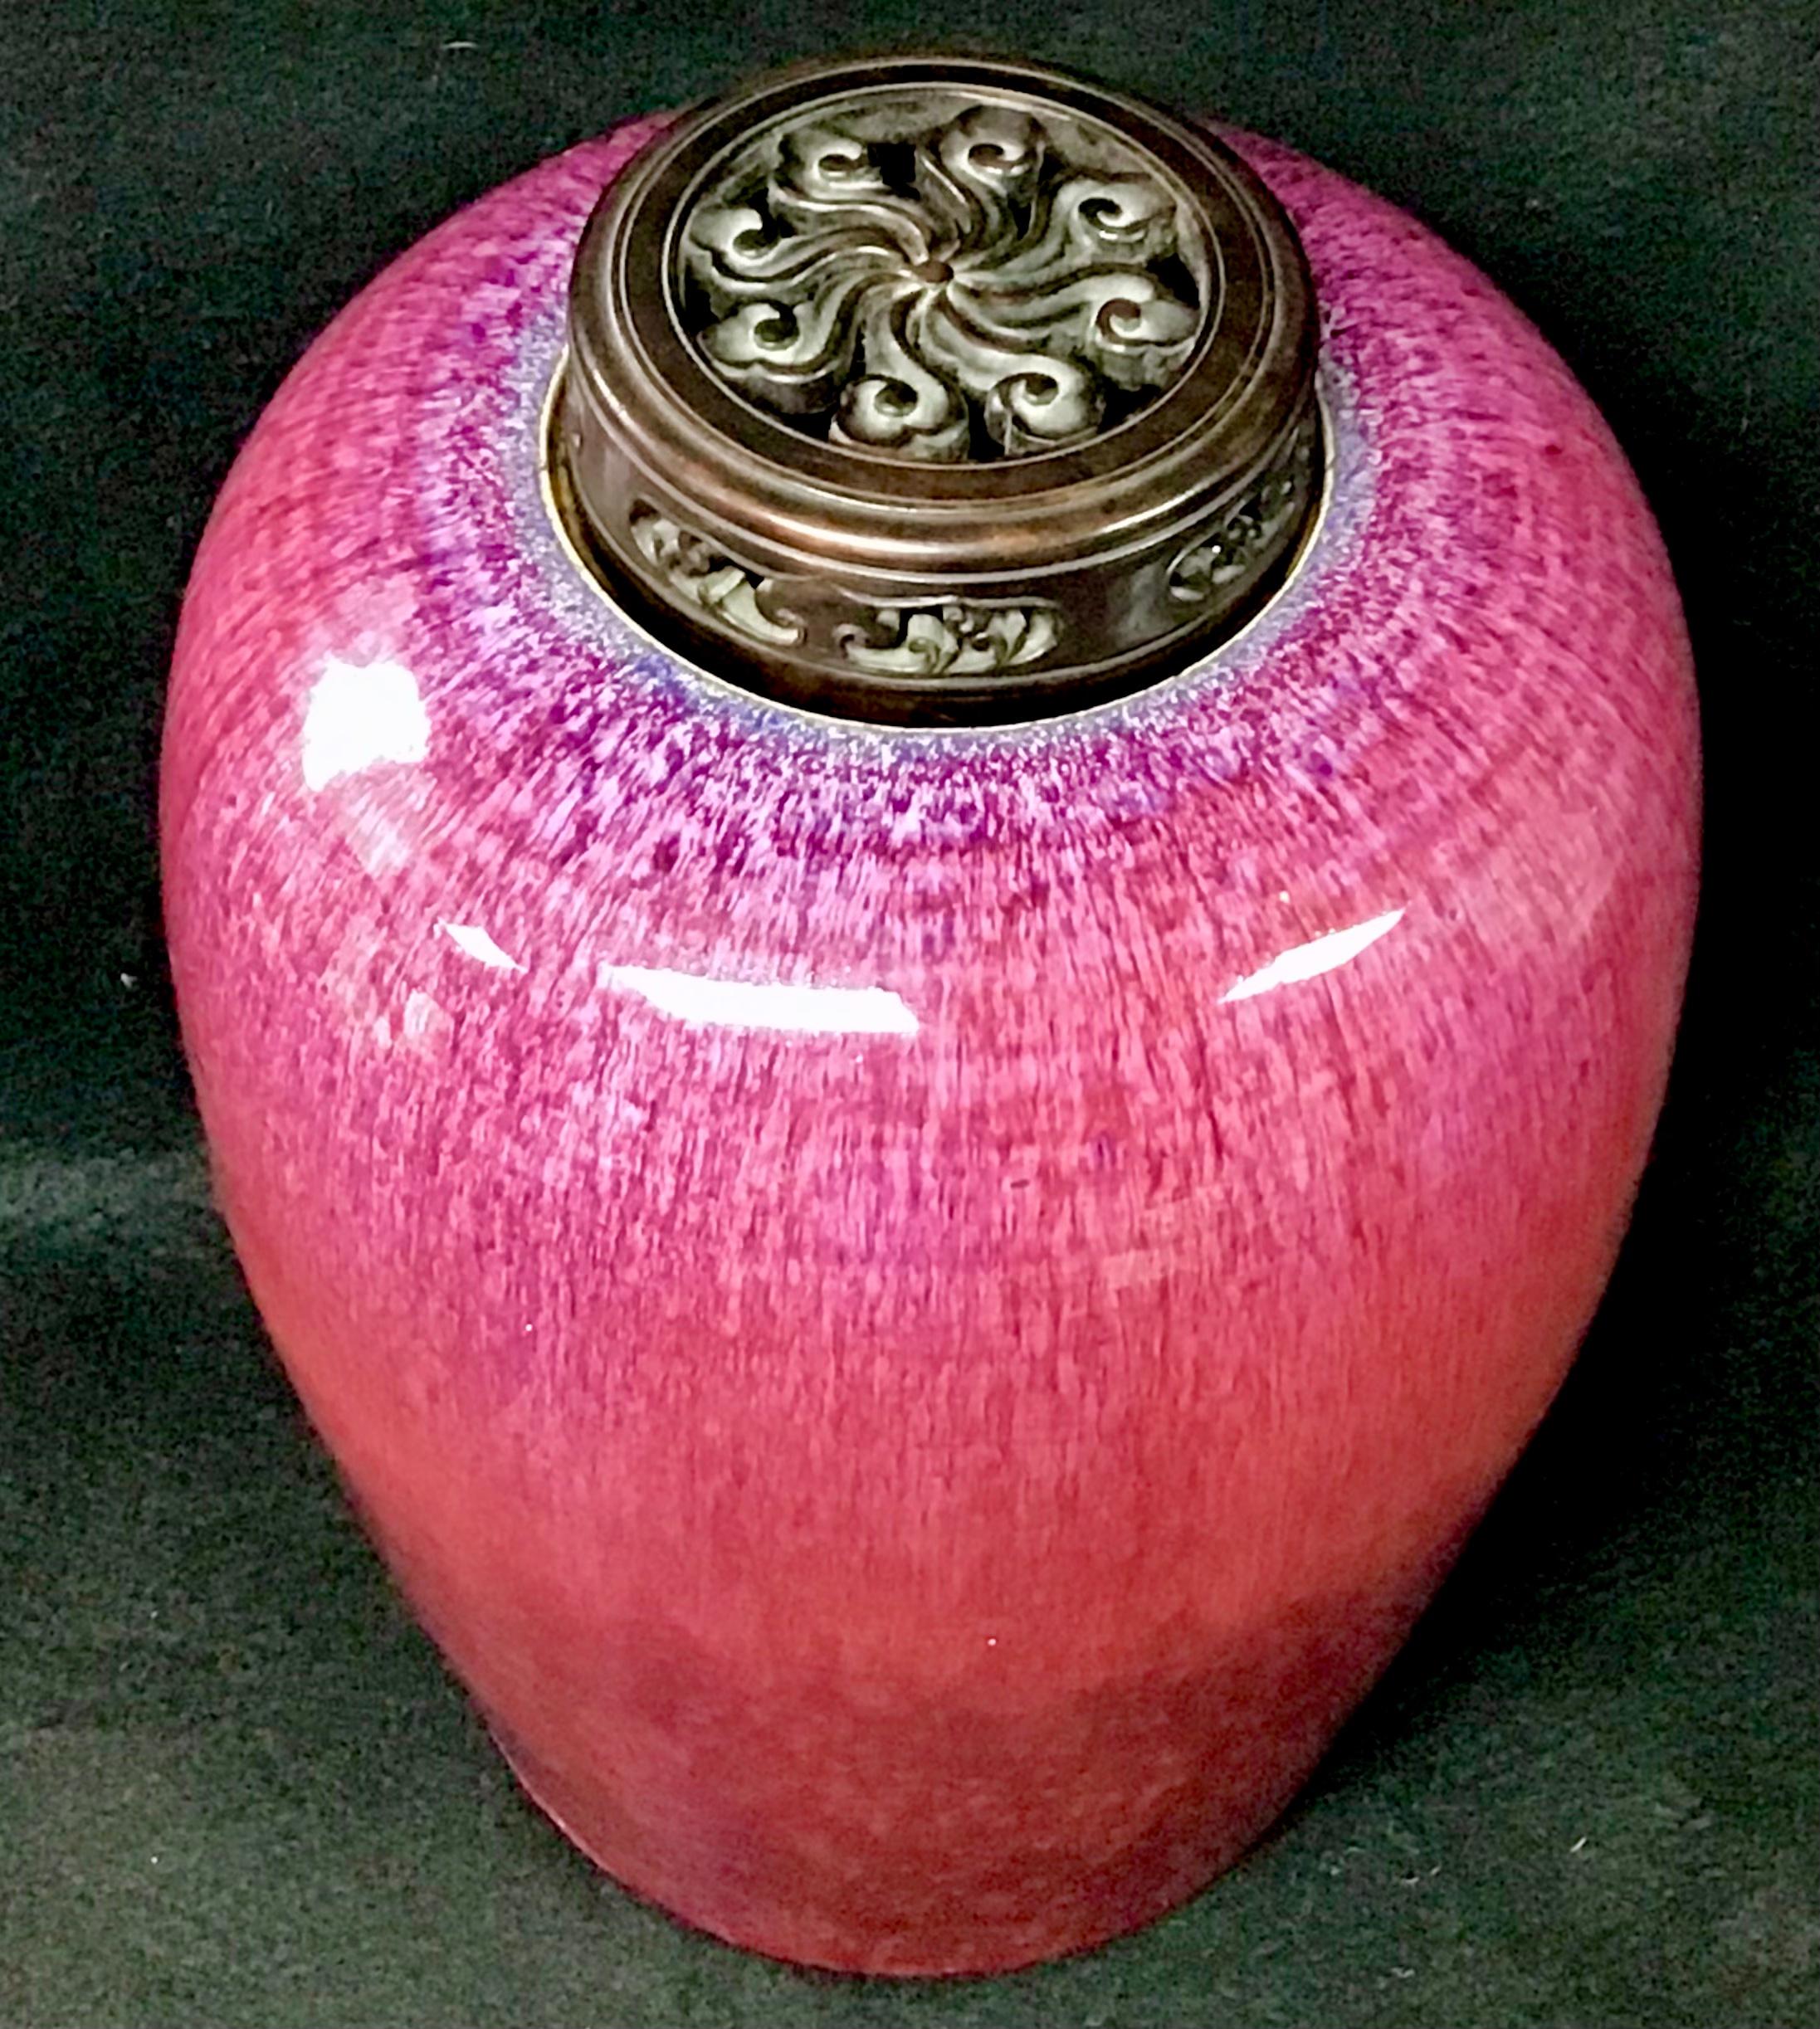 Chinese oval flambe ginger jar with carved wood lid. Flambé ware captivates with beautiful irregularity and vibrant blue and purple tones. These streaky, iridescent colors are the result of metallic materials in the glaze that cause separation at